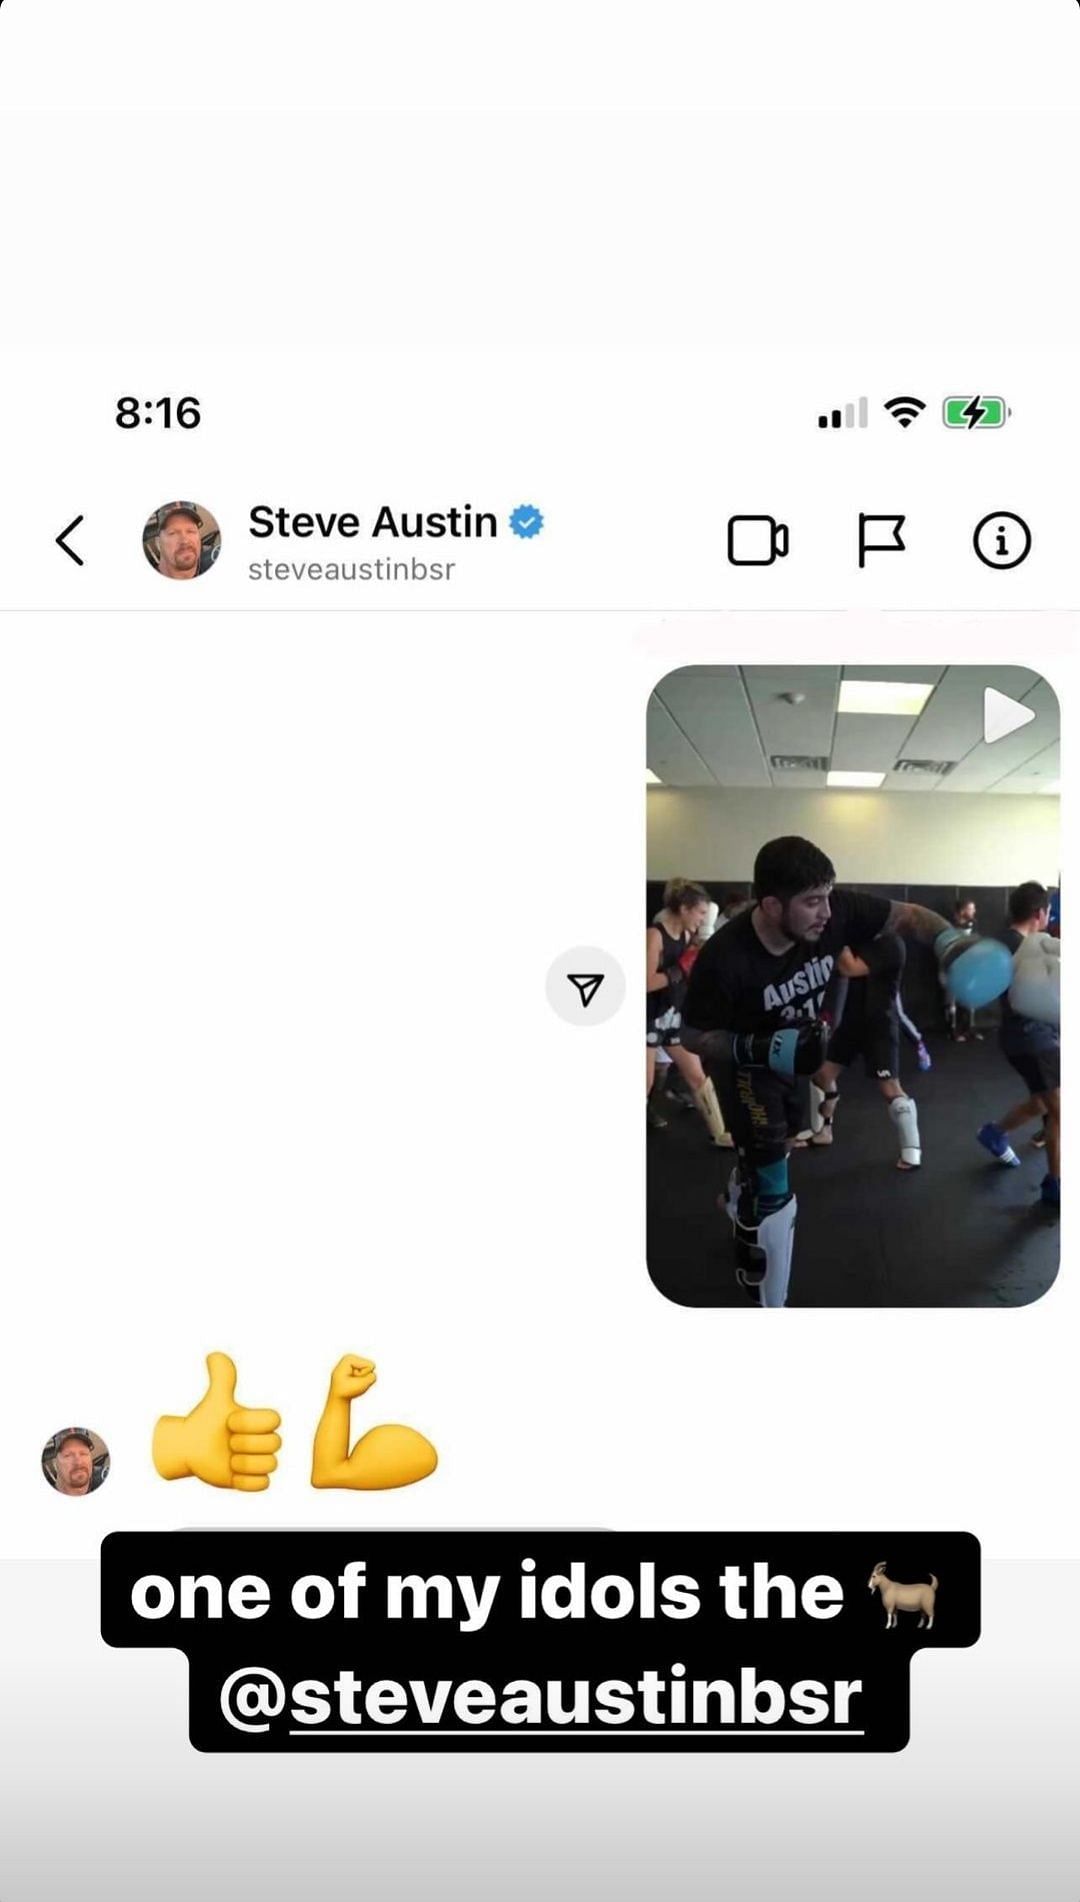 Danis uploads a screenshot of his interaction with Austin, calls him one of his idols.